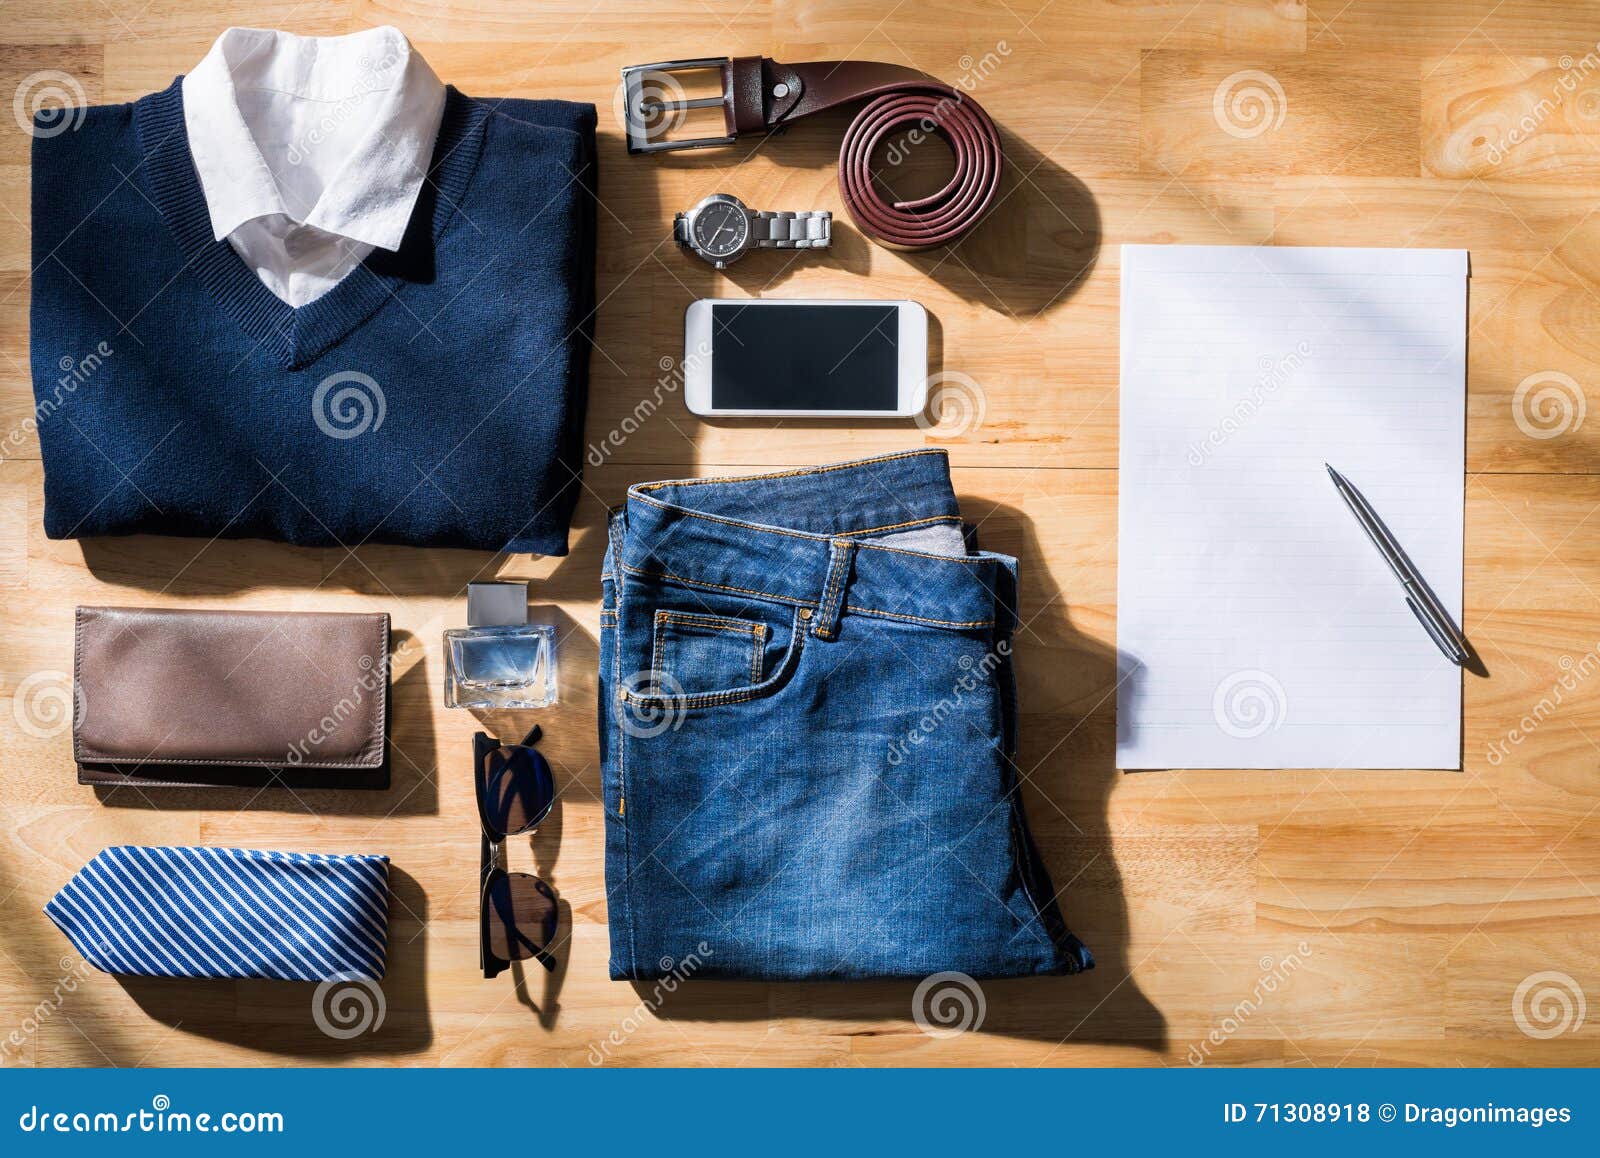 Accessories of Business Person Stock Photo - Image of watch, outfit ...